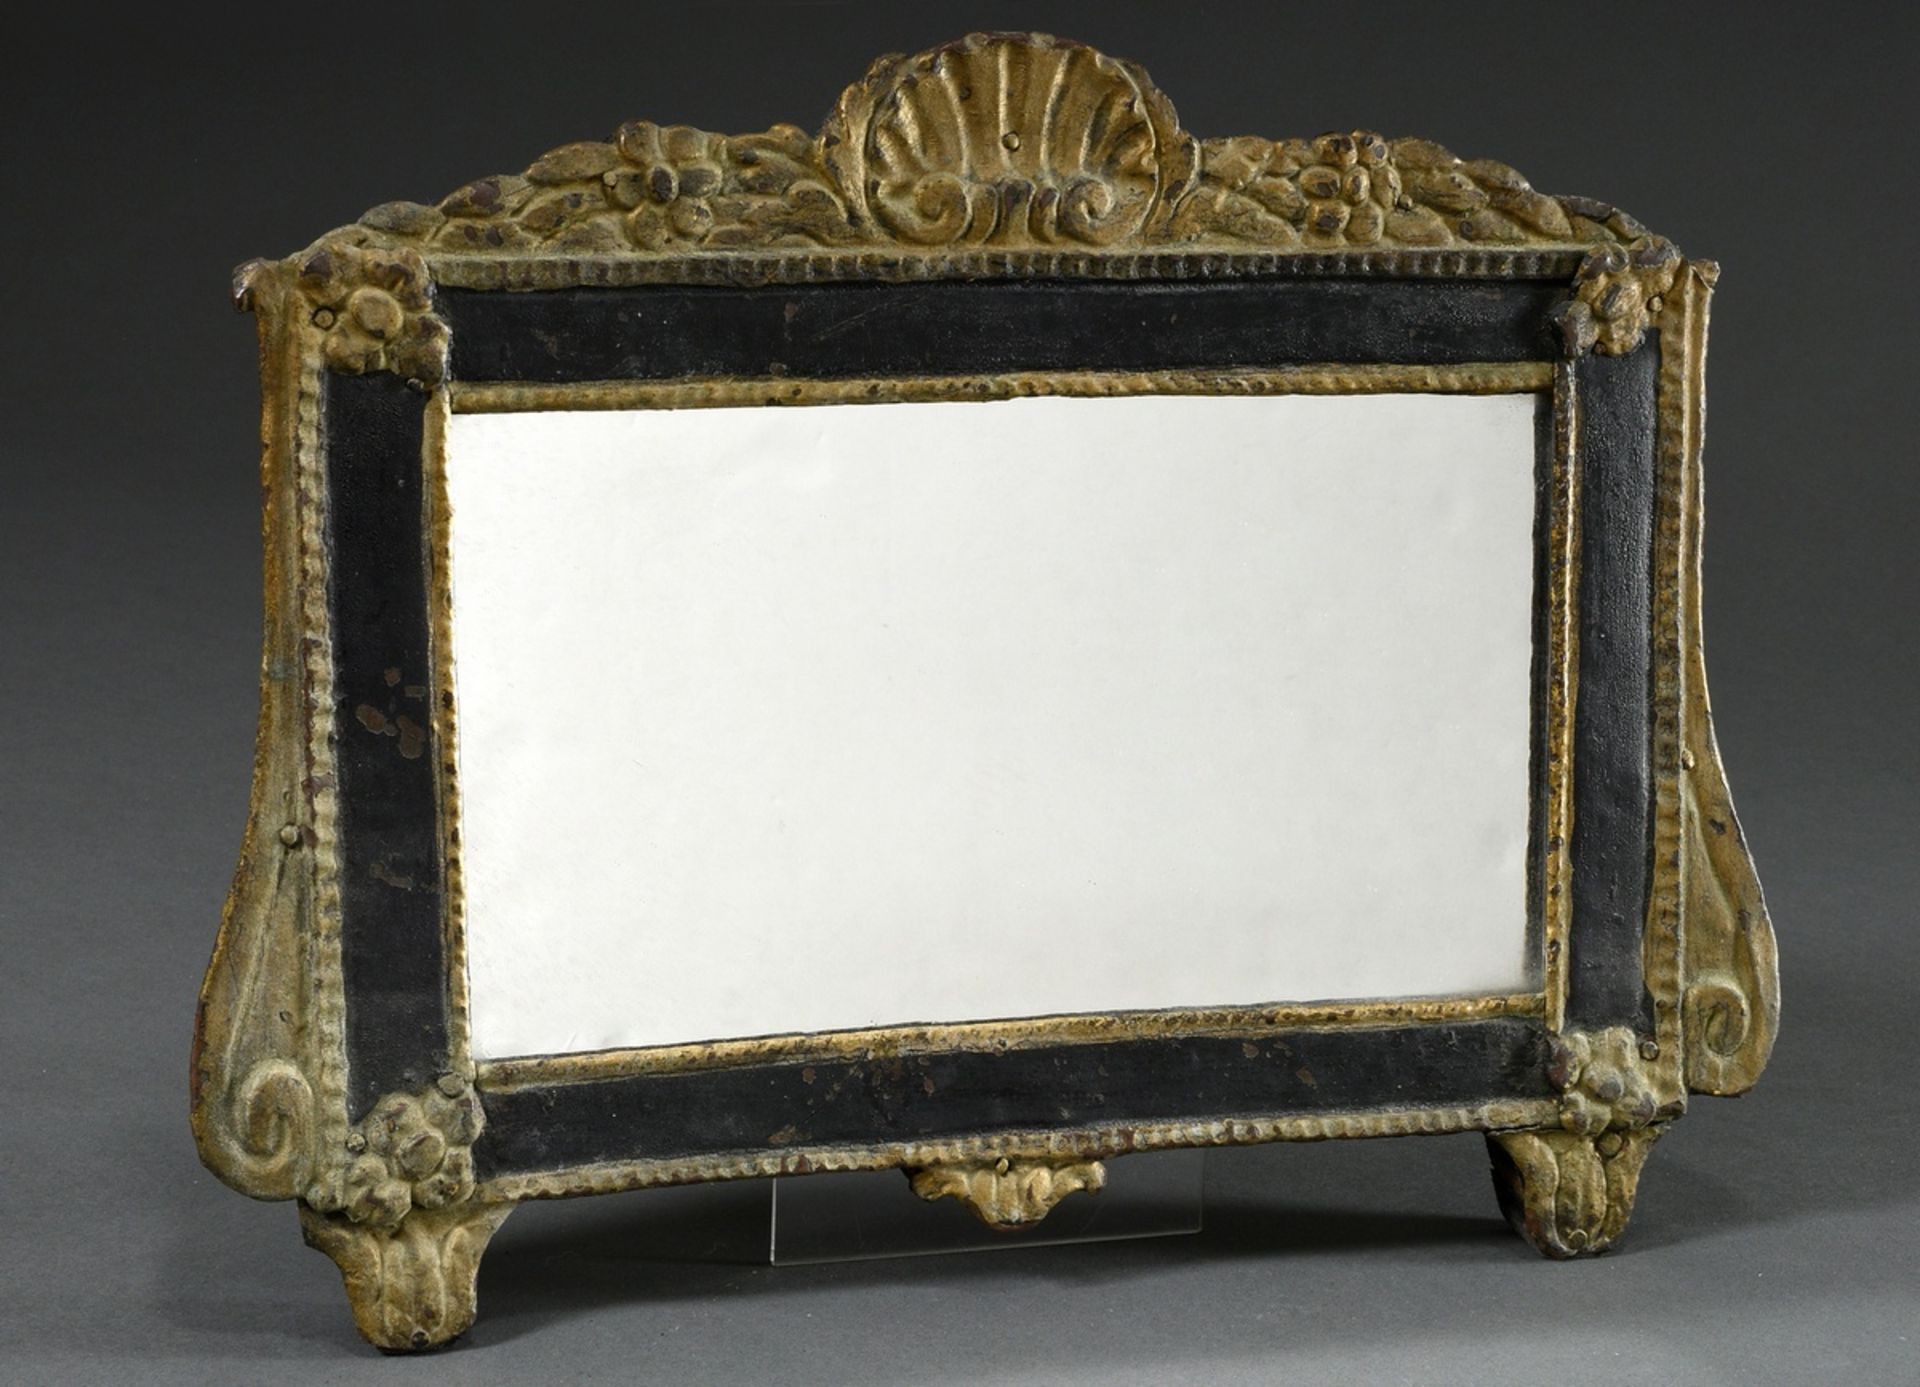 Small transverse mirror with rustic floral ornamentation and shell crowning, carved wood and black/